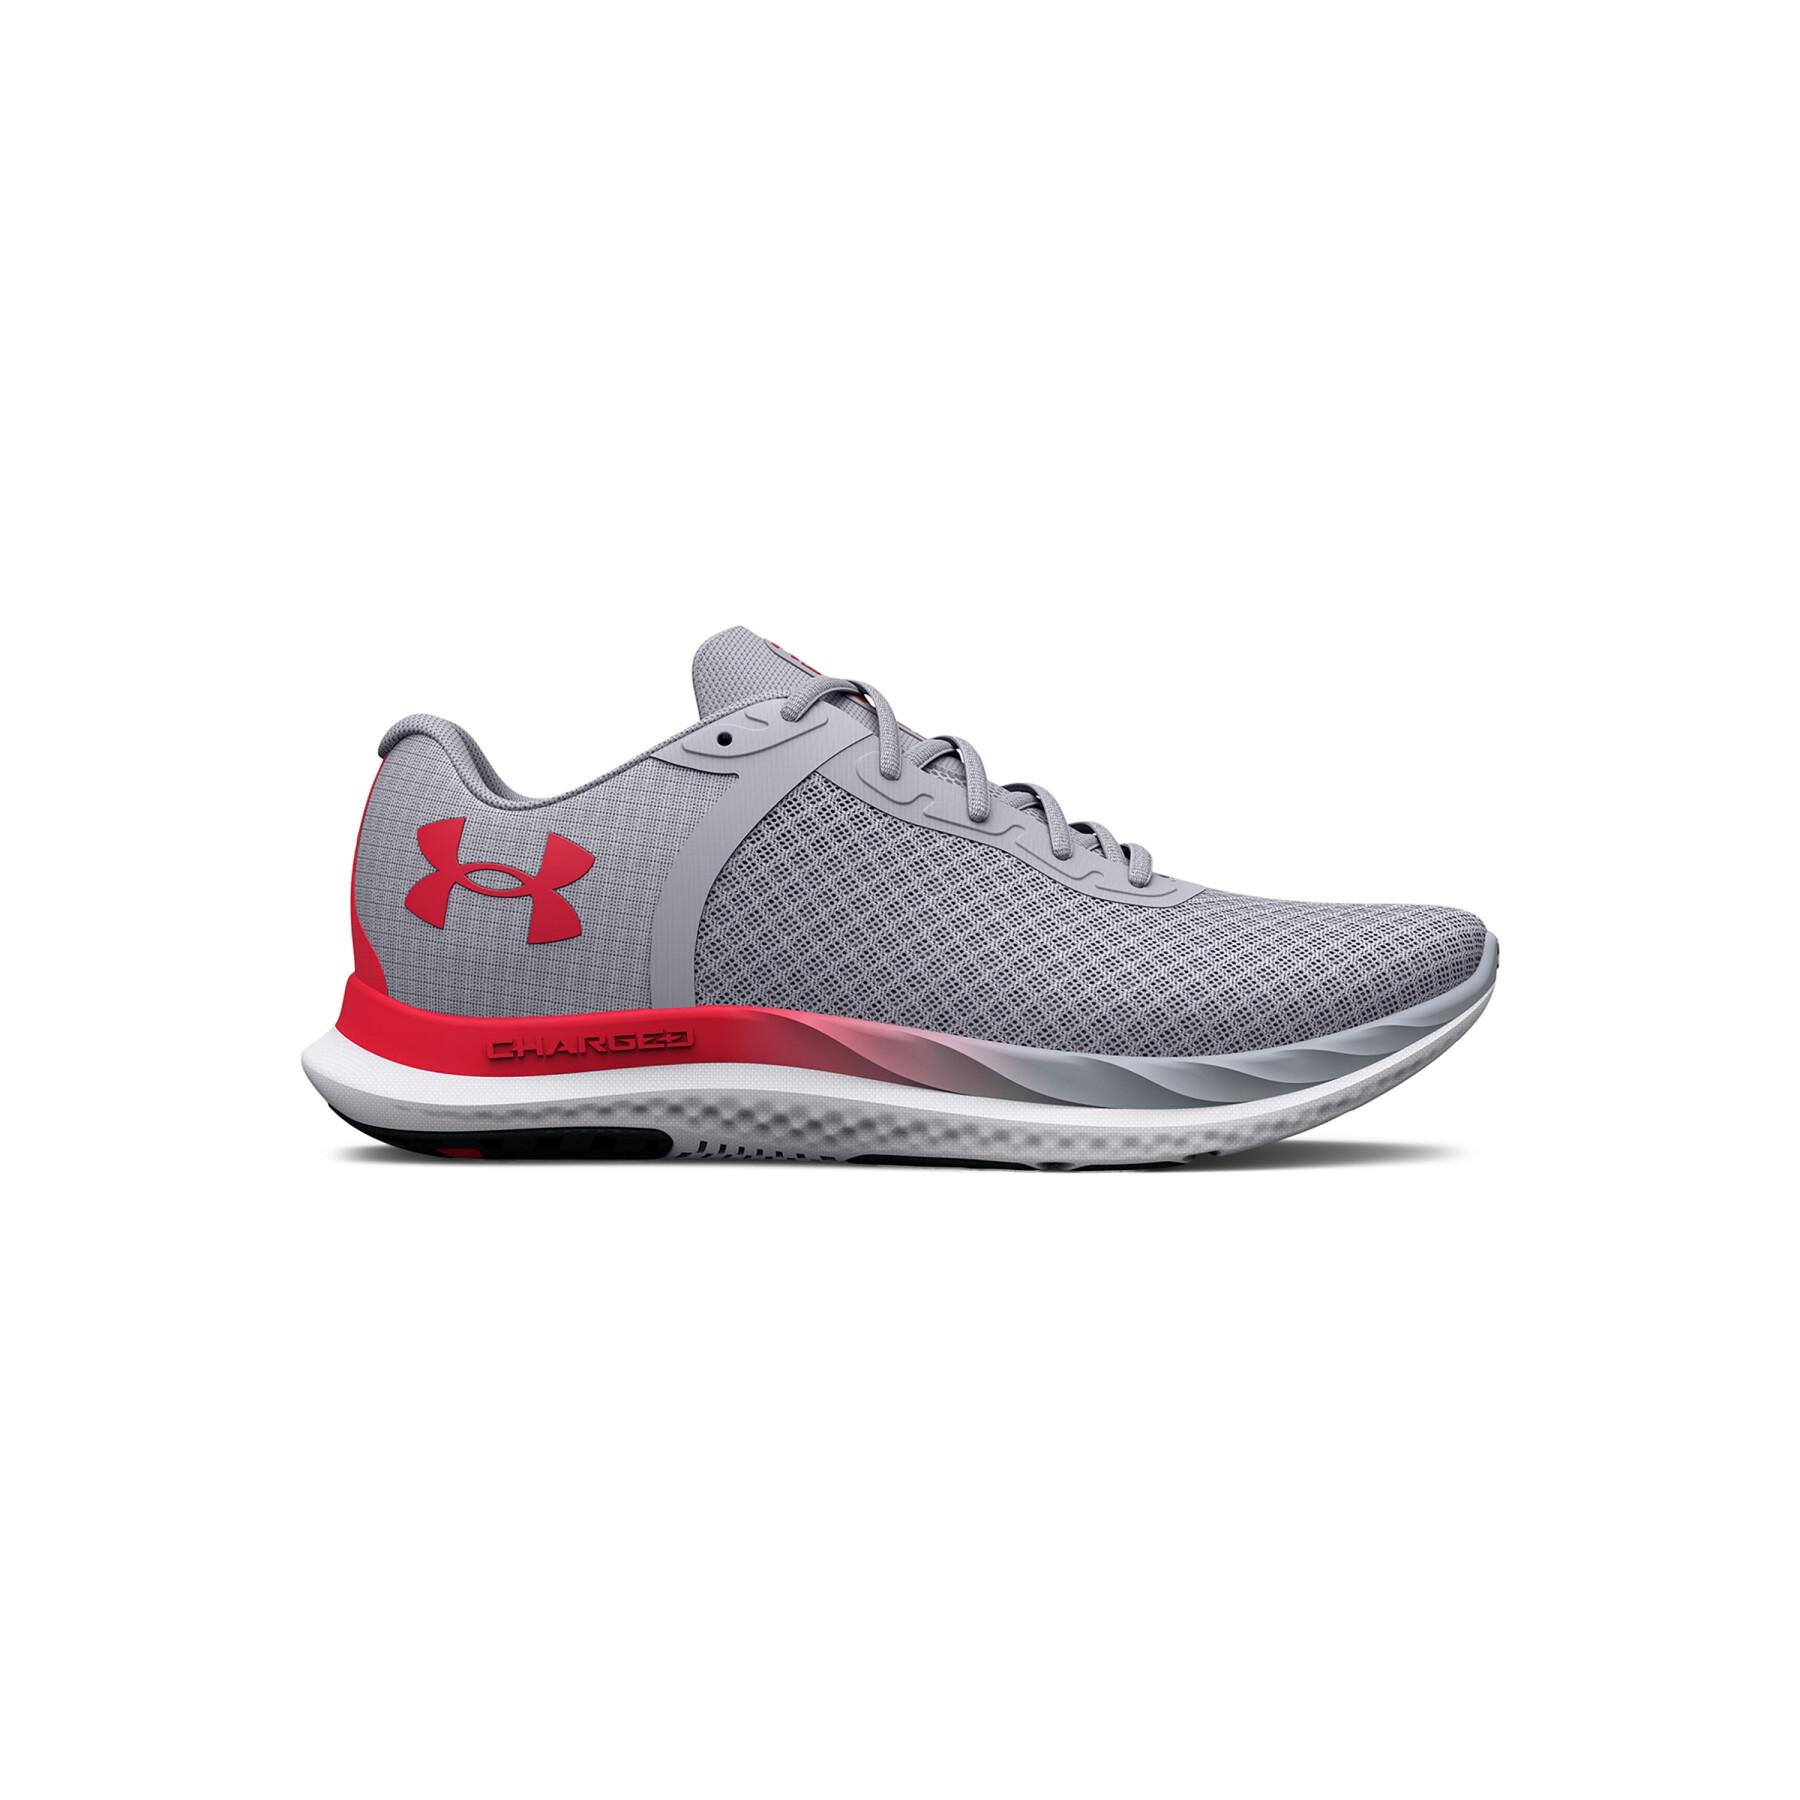 Chaussures de running Under Armour Charged breeze